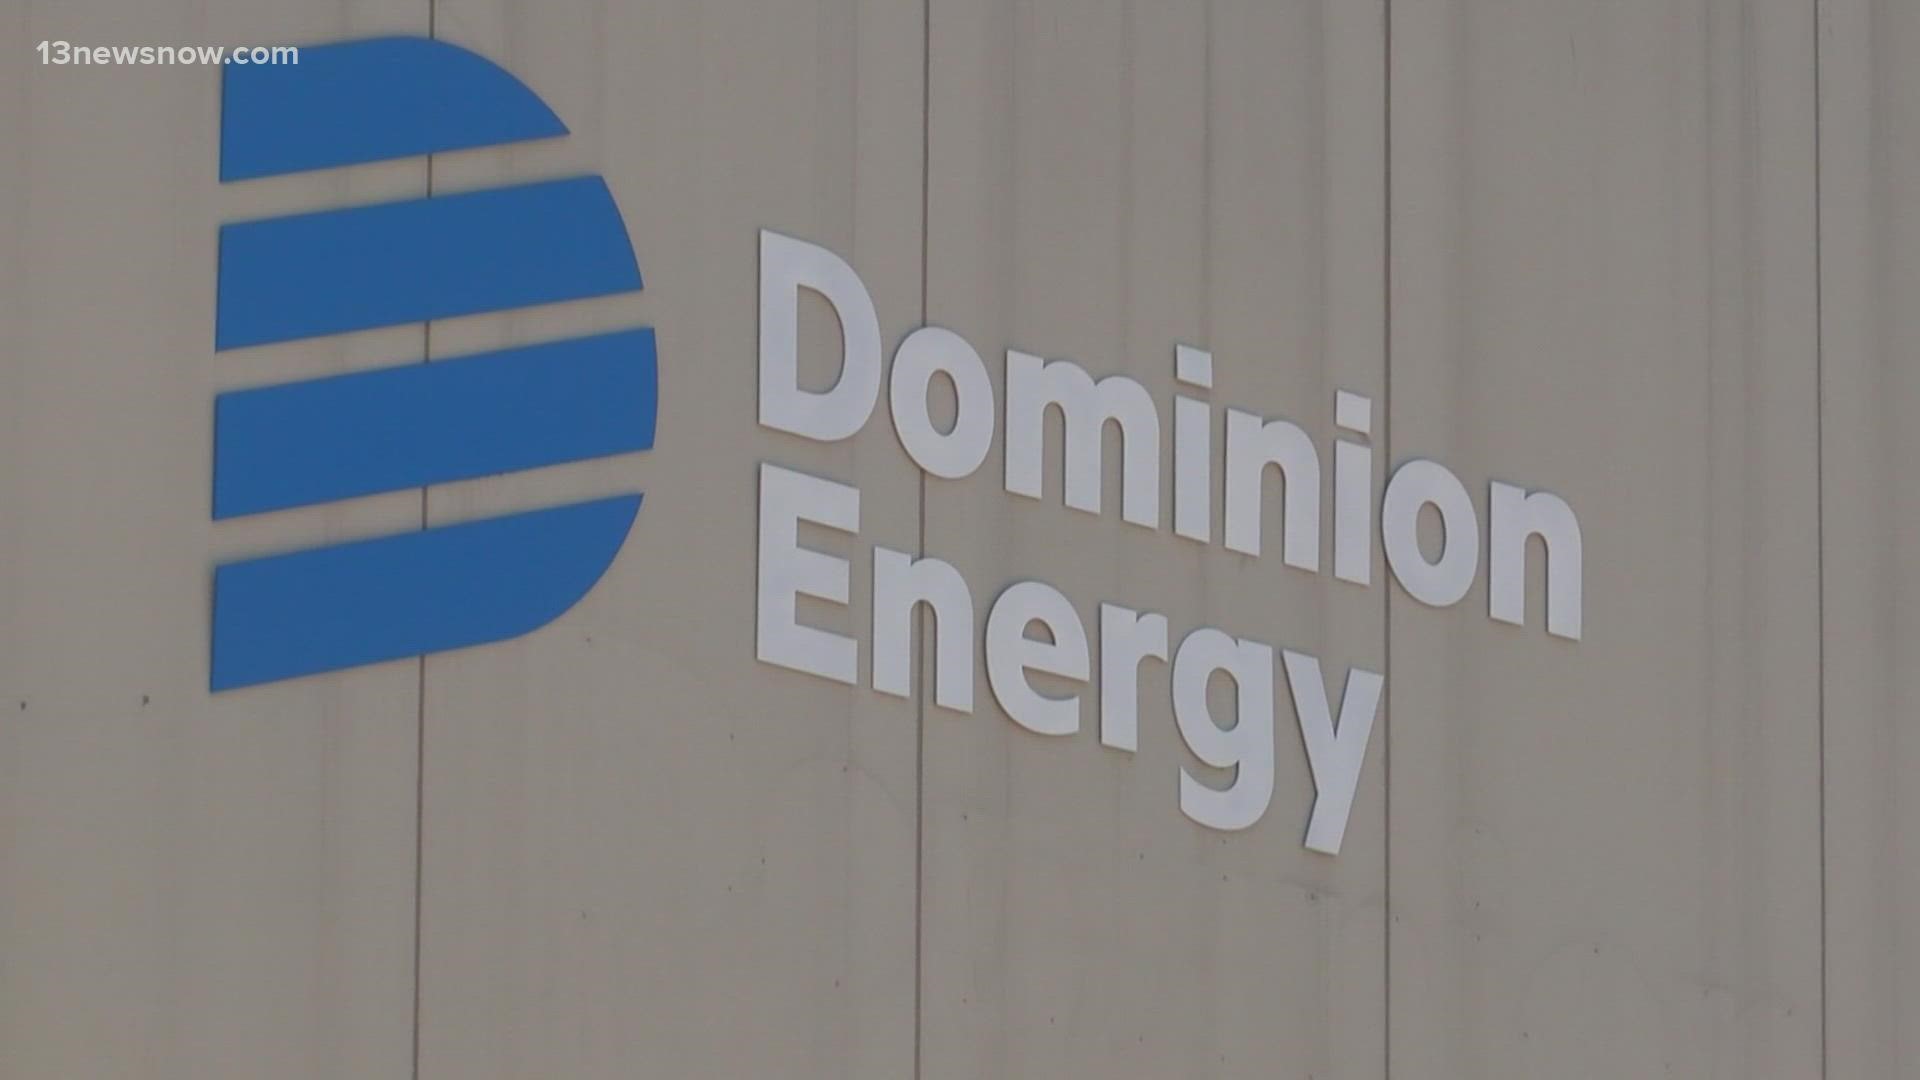 If you are two months behind on payments, or more, Dominion Energy could cut your service next month.